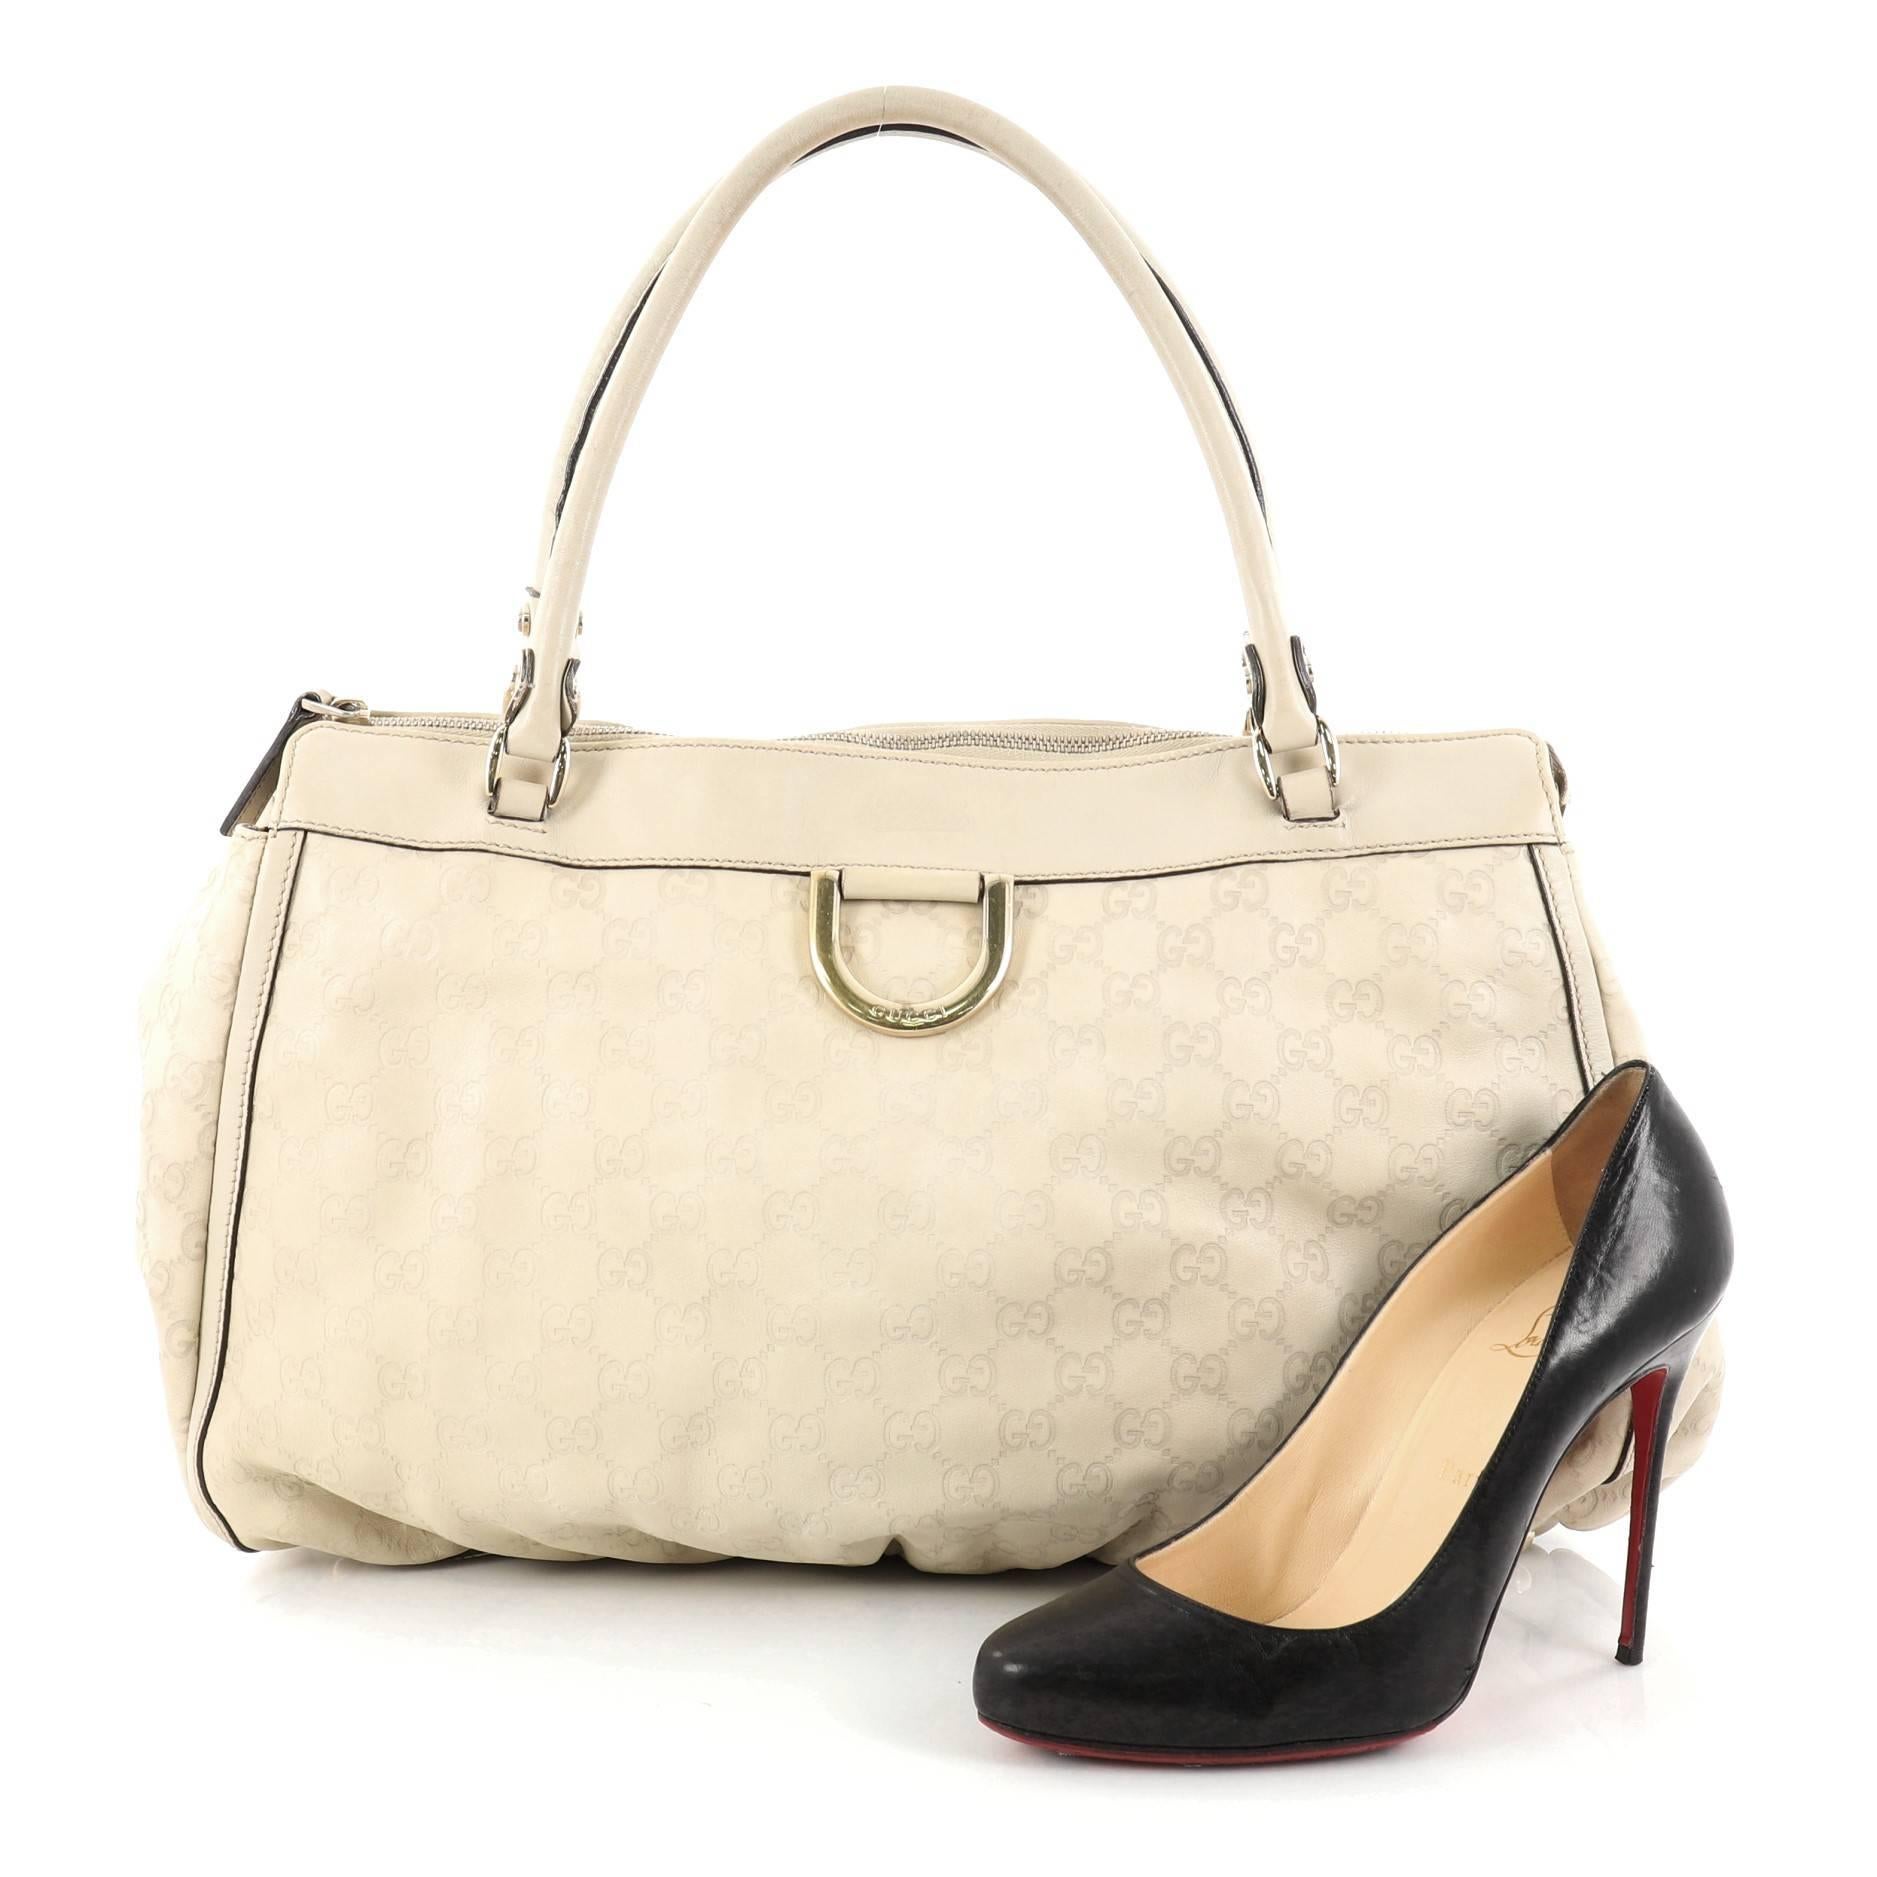 This authentic Gucci D Ring Tote Guccissima Leather Large is perfect for everyday use. Crafted from light beige guccissima leather, this tote features dual-rolled tall handles, light beige leather trims, Gucci handwritten stamped logo, signature D